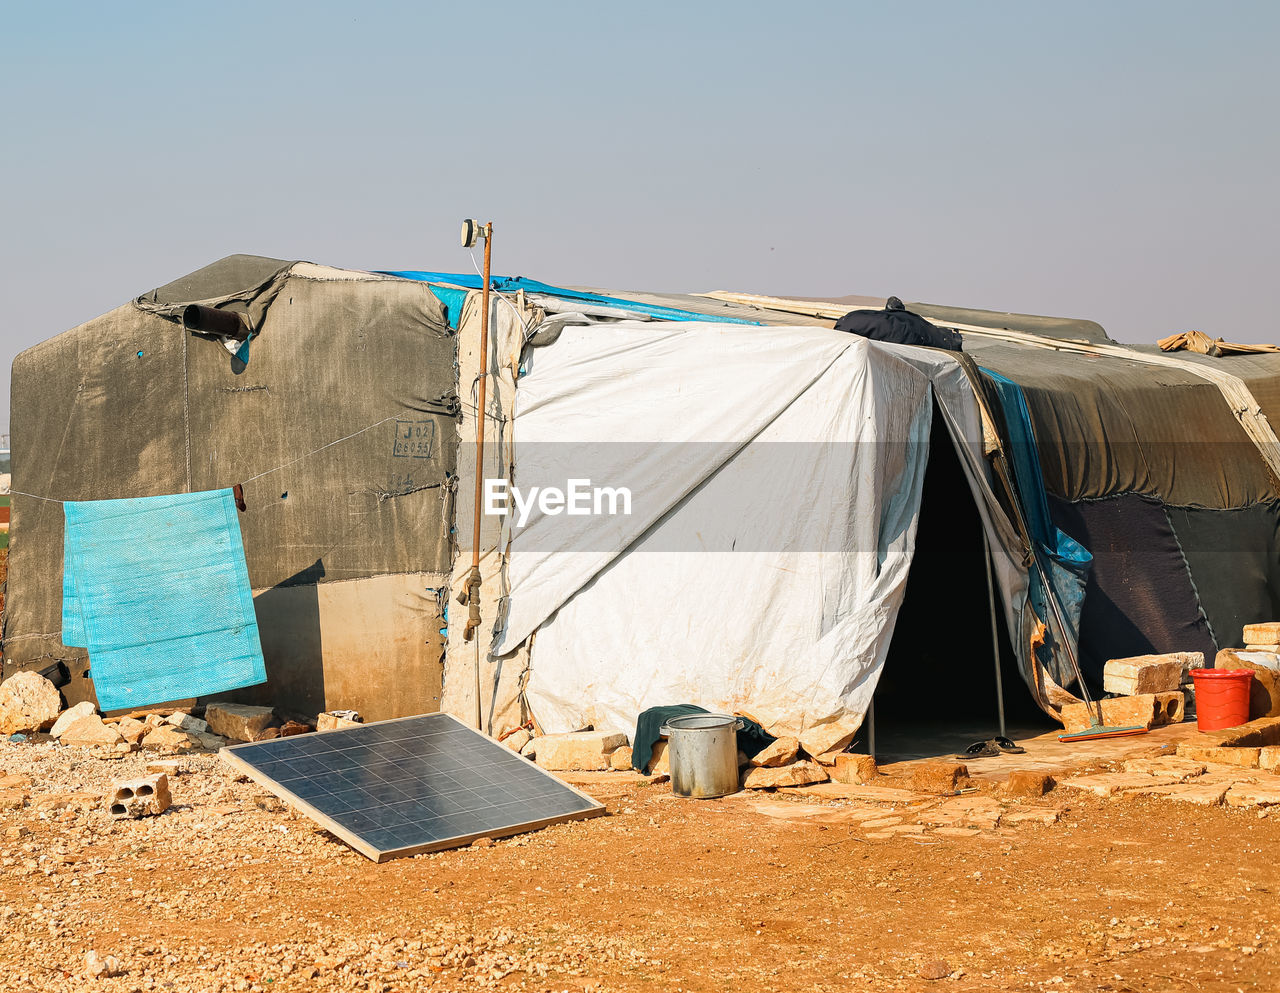 Difficult conditions in which refugees live, which caused the spread of cholera in northern syria